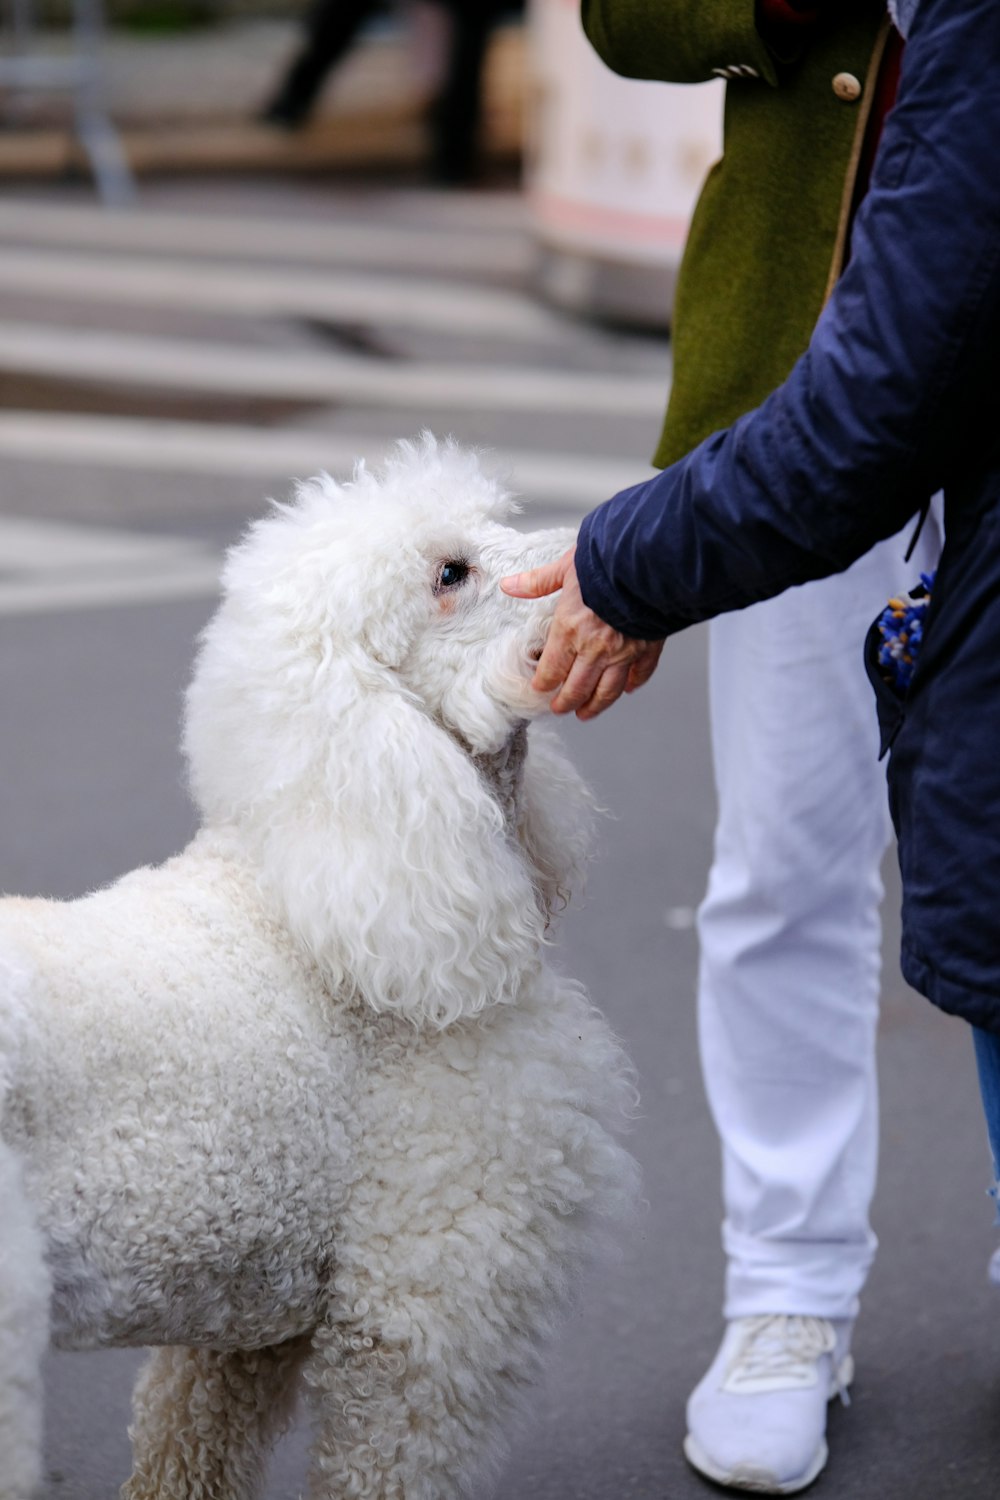 a person petting a white poodle on the street